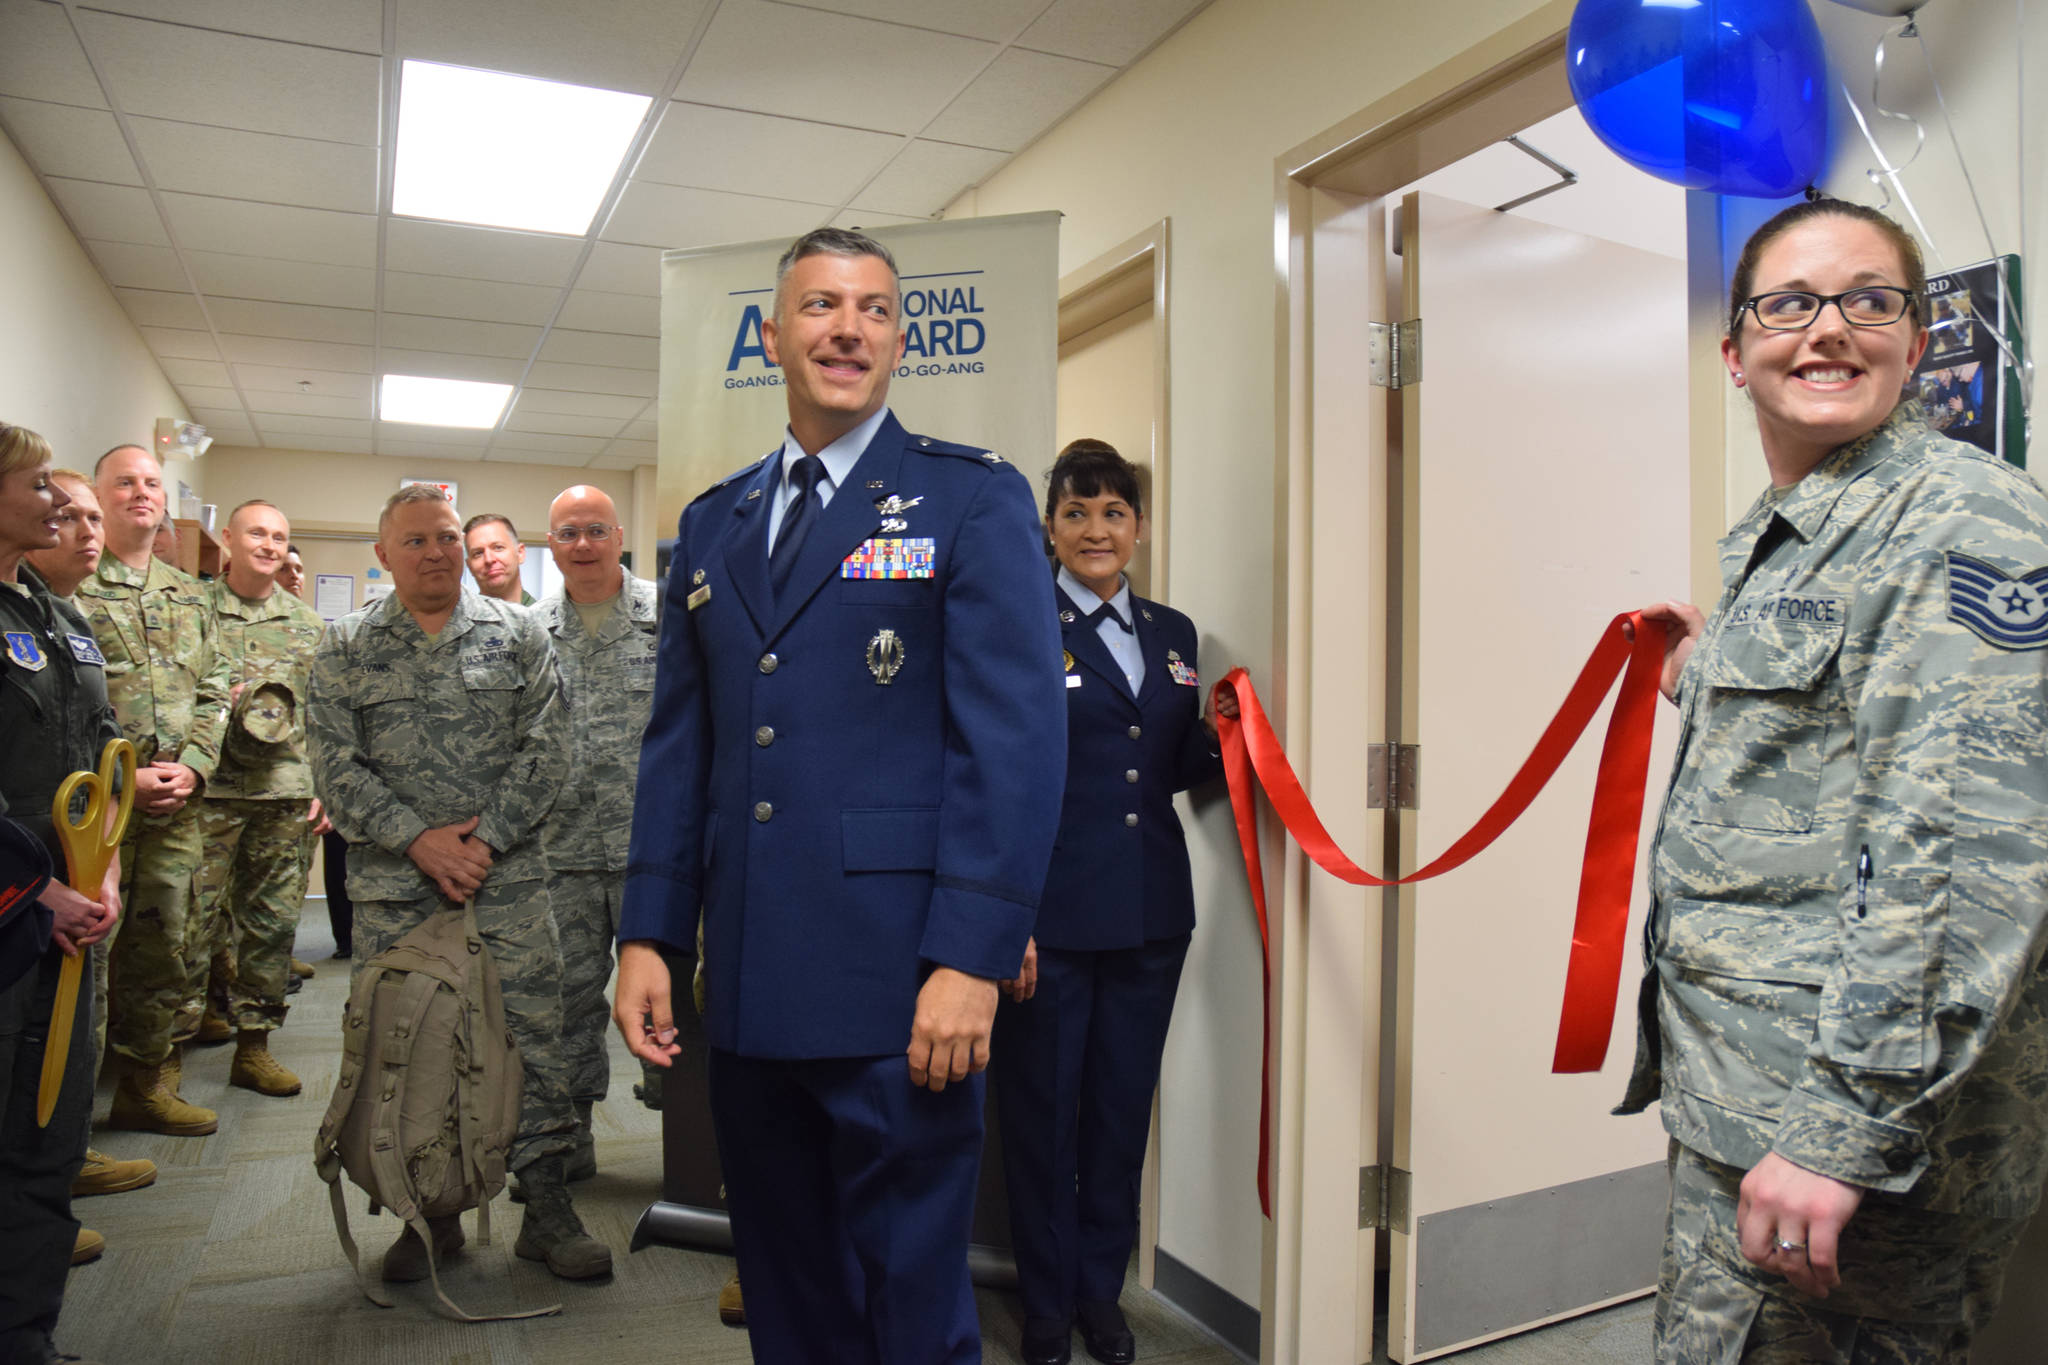 Alaska Air National Guard Col. Torrence Saxe, Commander of the168th Wing, celebrates the opening of the service branch’s Juneau recruiting office, the first outside the Anchorage and Fairbanks road system. Senior Master Sgt. Vickie Padello, who oversaw the office’s opening, and Technical Sgt. Jasmine Gallatin, a recruiter, hold a ceremonial ribbon in front of the new office at the National Guard Armory in the University of Alaska Southeast Rec Center. (Kevin Gullufsen | Juneau Empire)